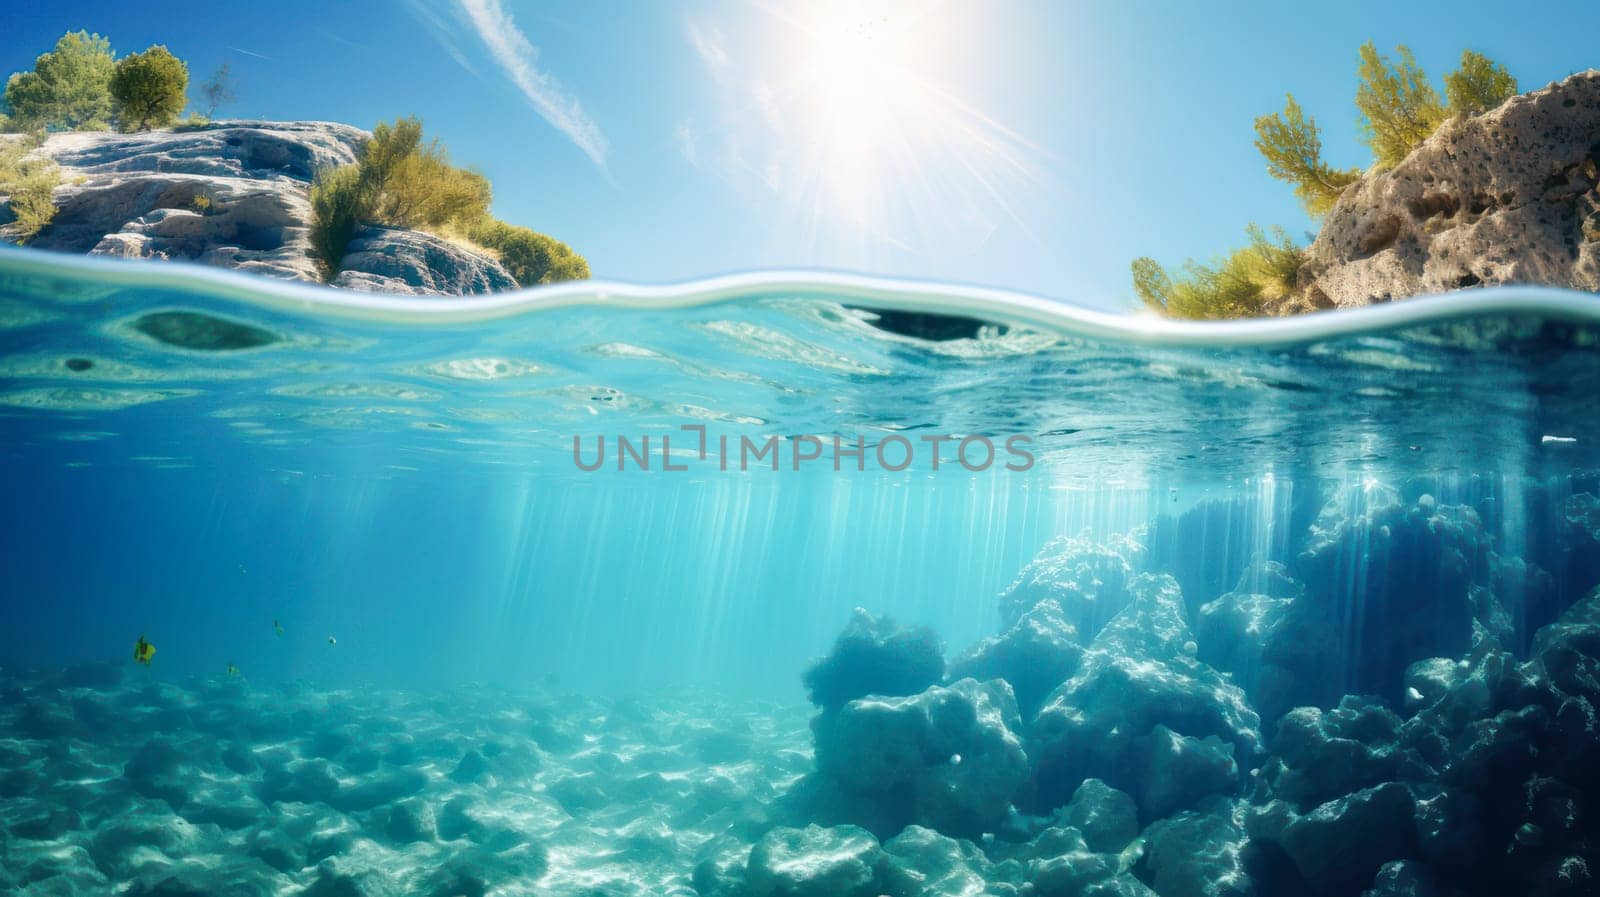 Beautiful blue underwater landscape, sky and mountains. Beautiful landscape, picture, phone screensaver, copy space, advertising, travel agency, tourism, solitude with nature, without people.